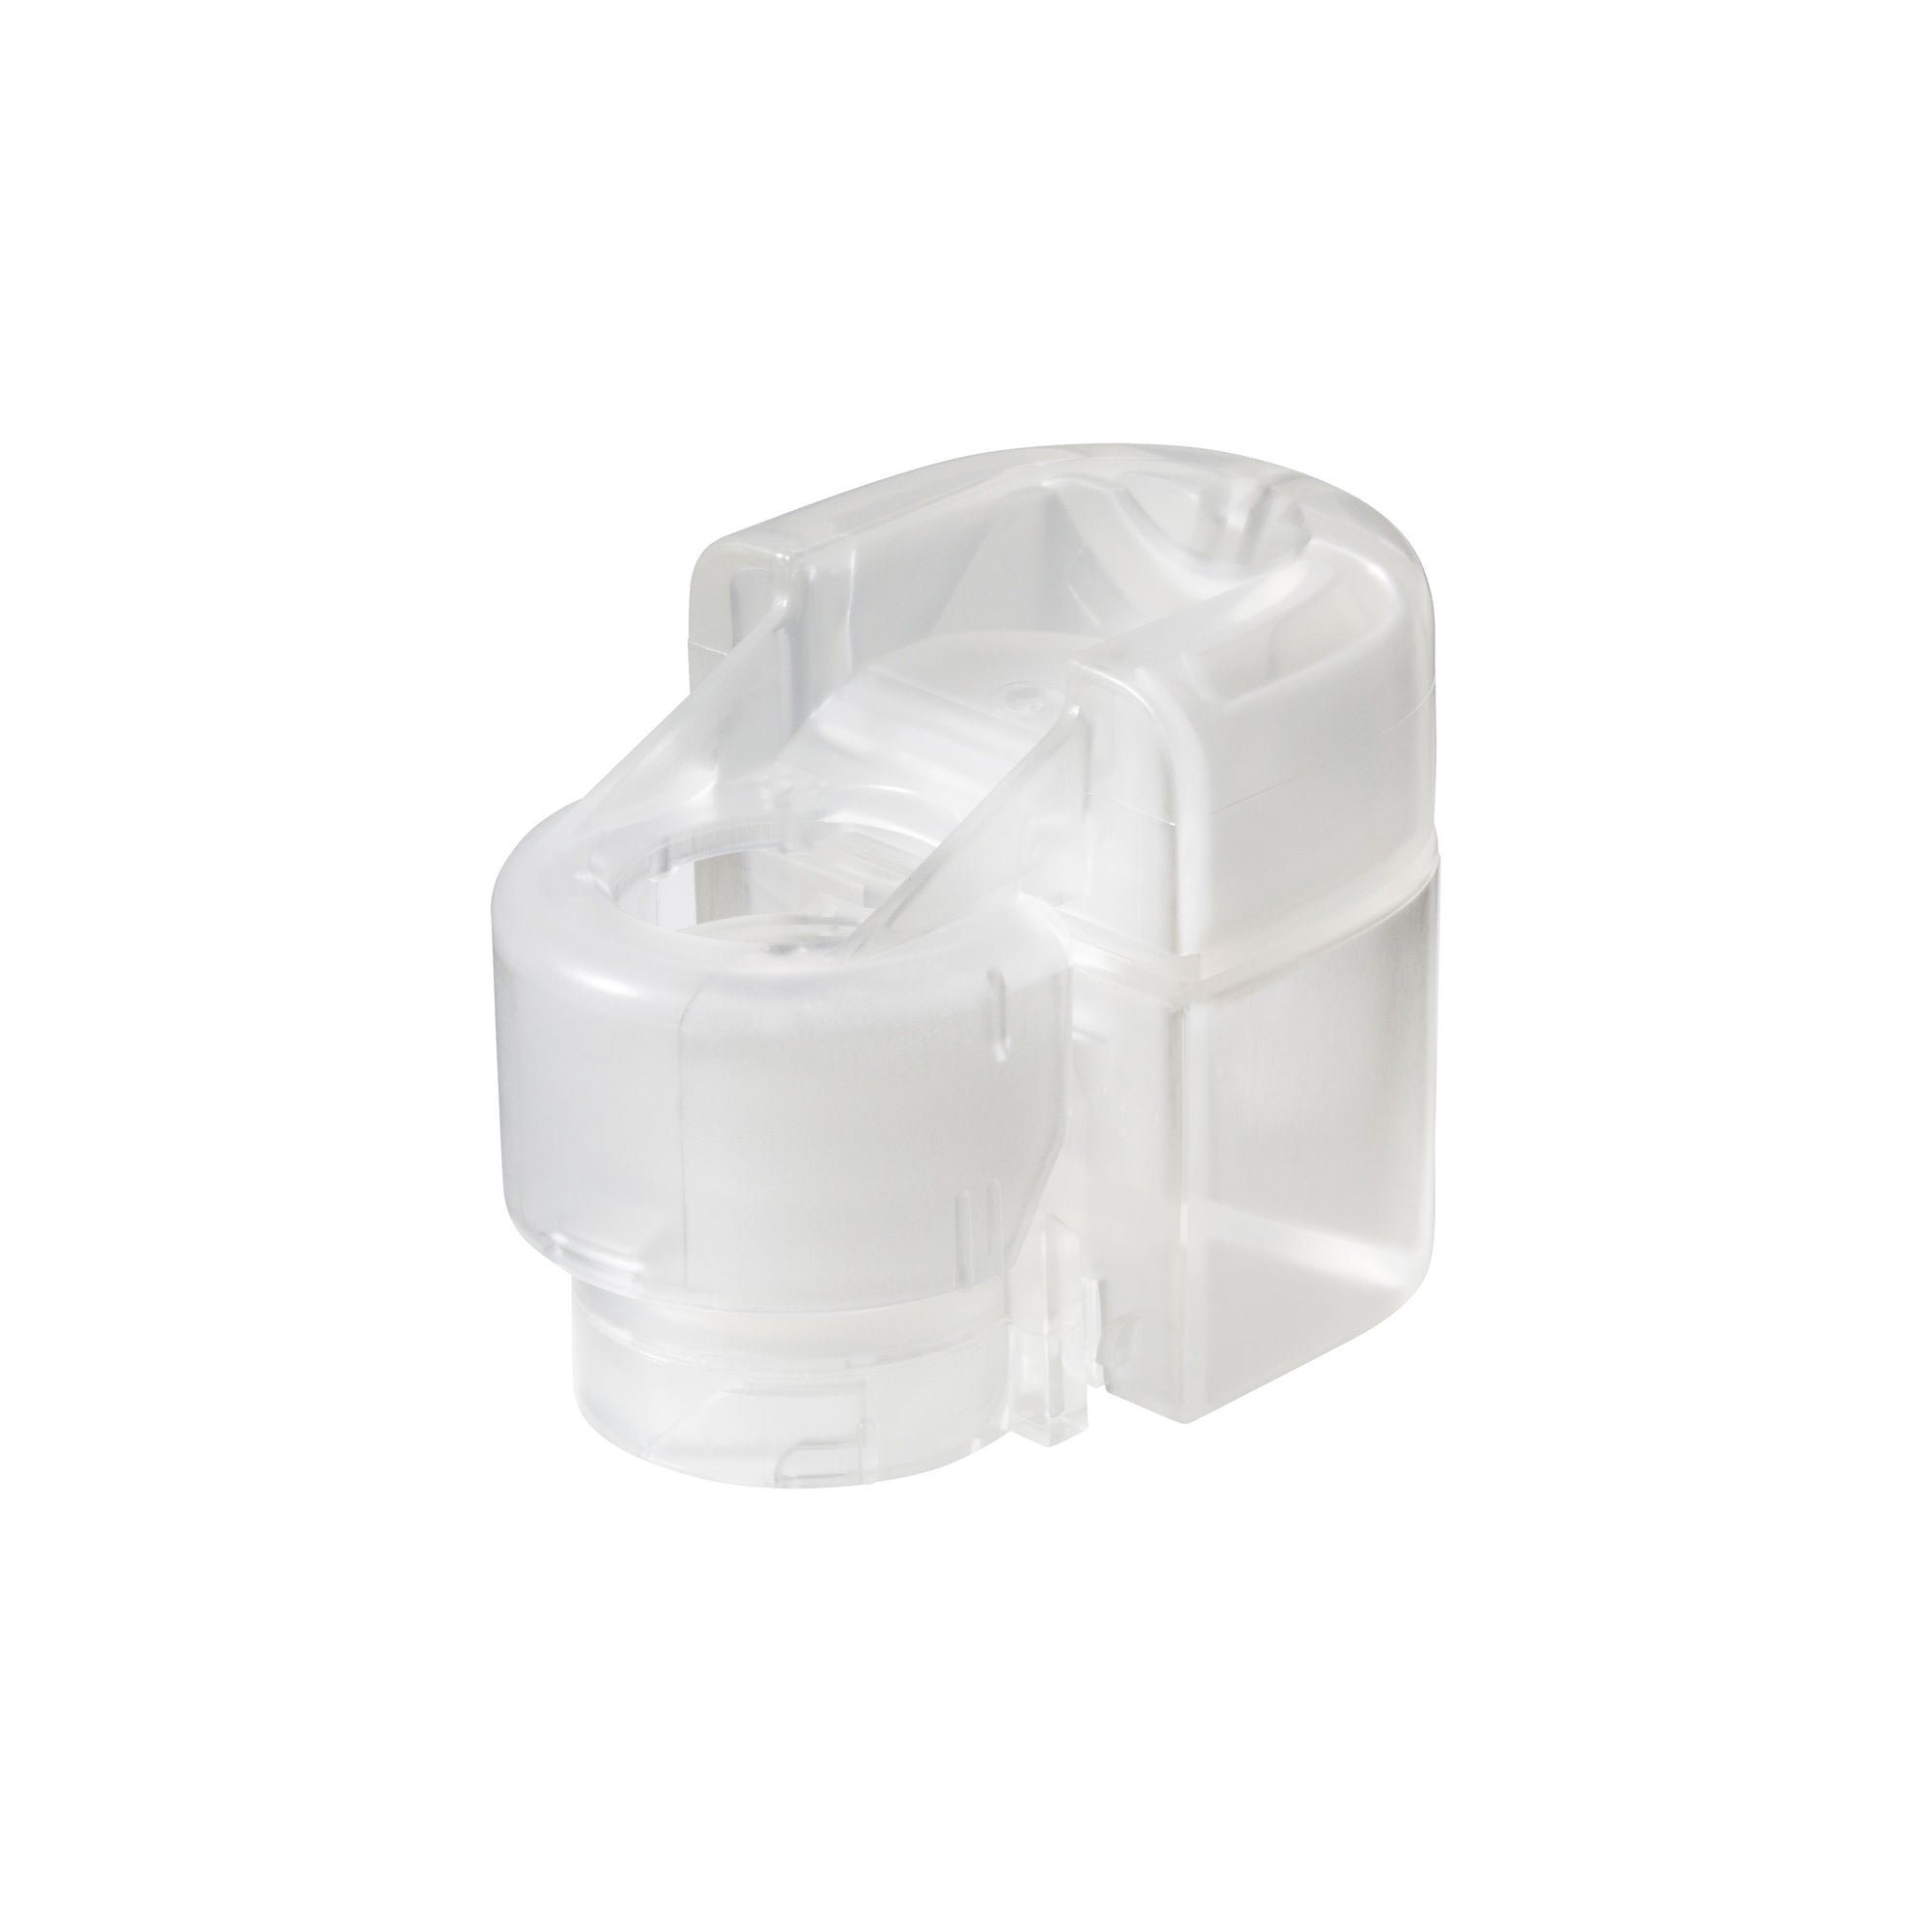 Omron U100 Medication Container